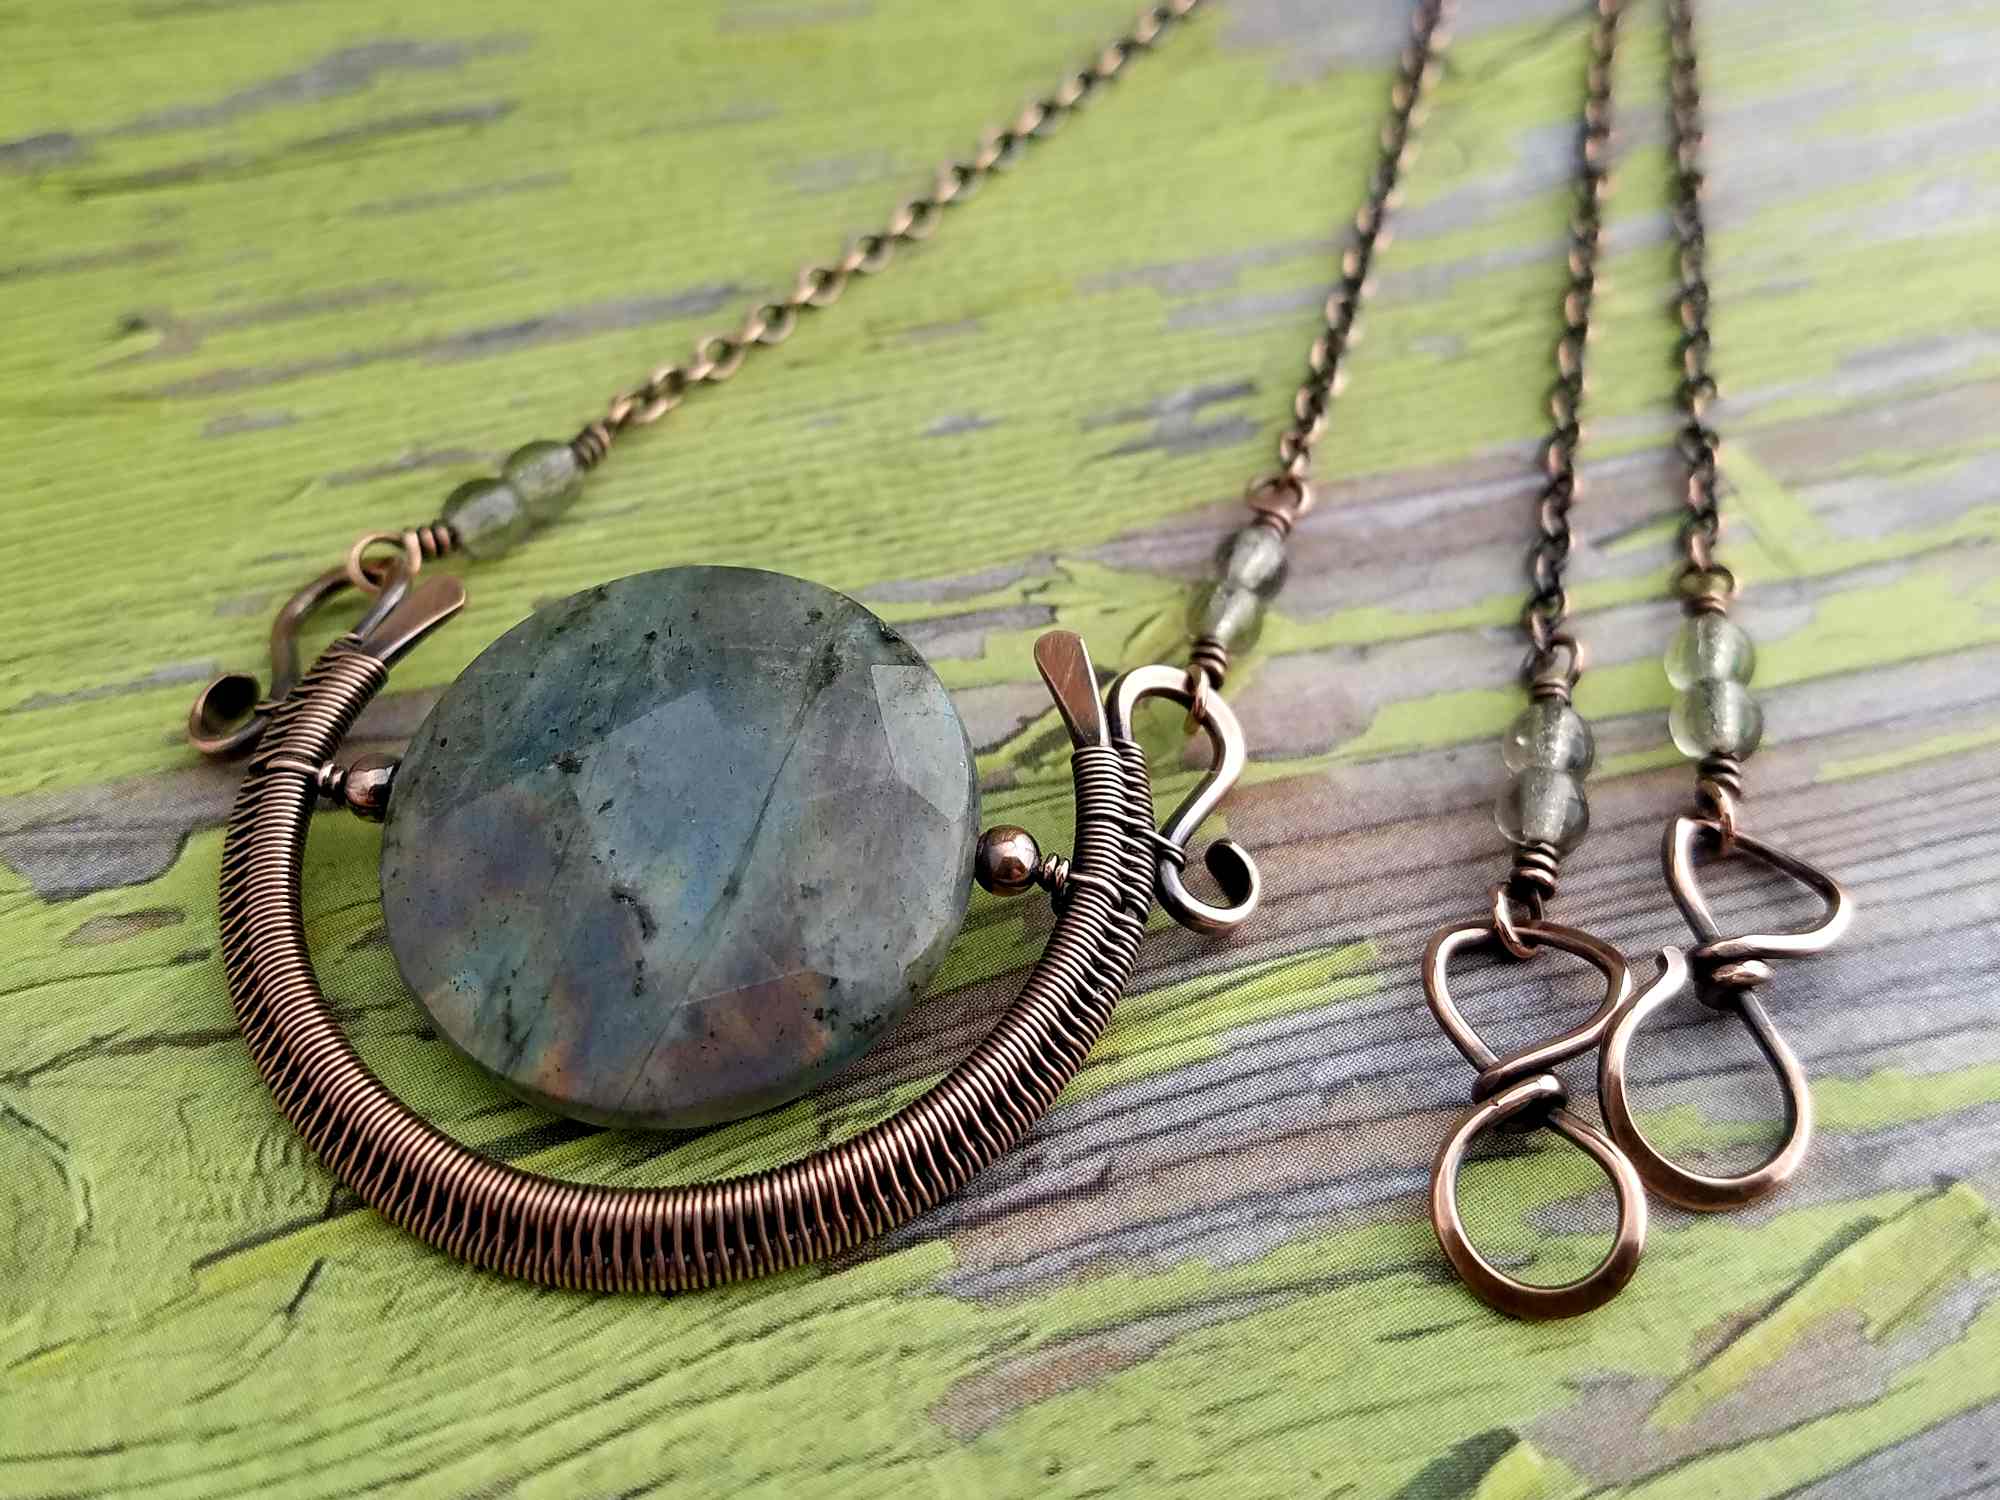 The Egyptian Sun Pendant featuring a faceted Labradorite focal bead and using my alternate method for securely suspending a focal bead within a woven wire frame.